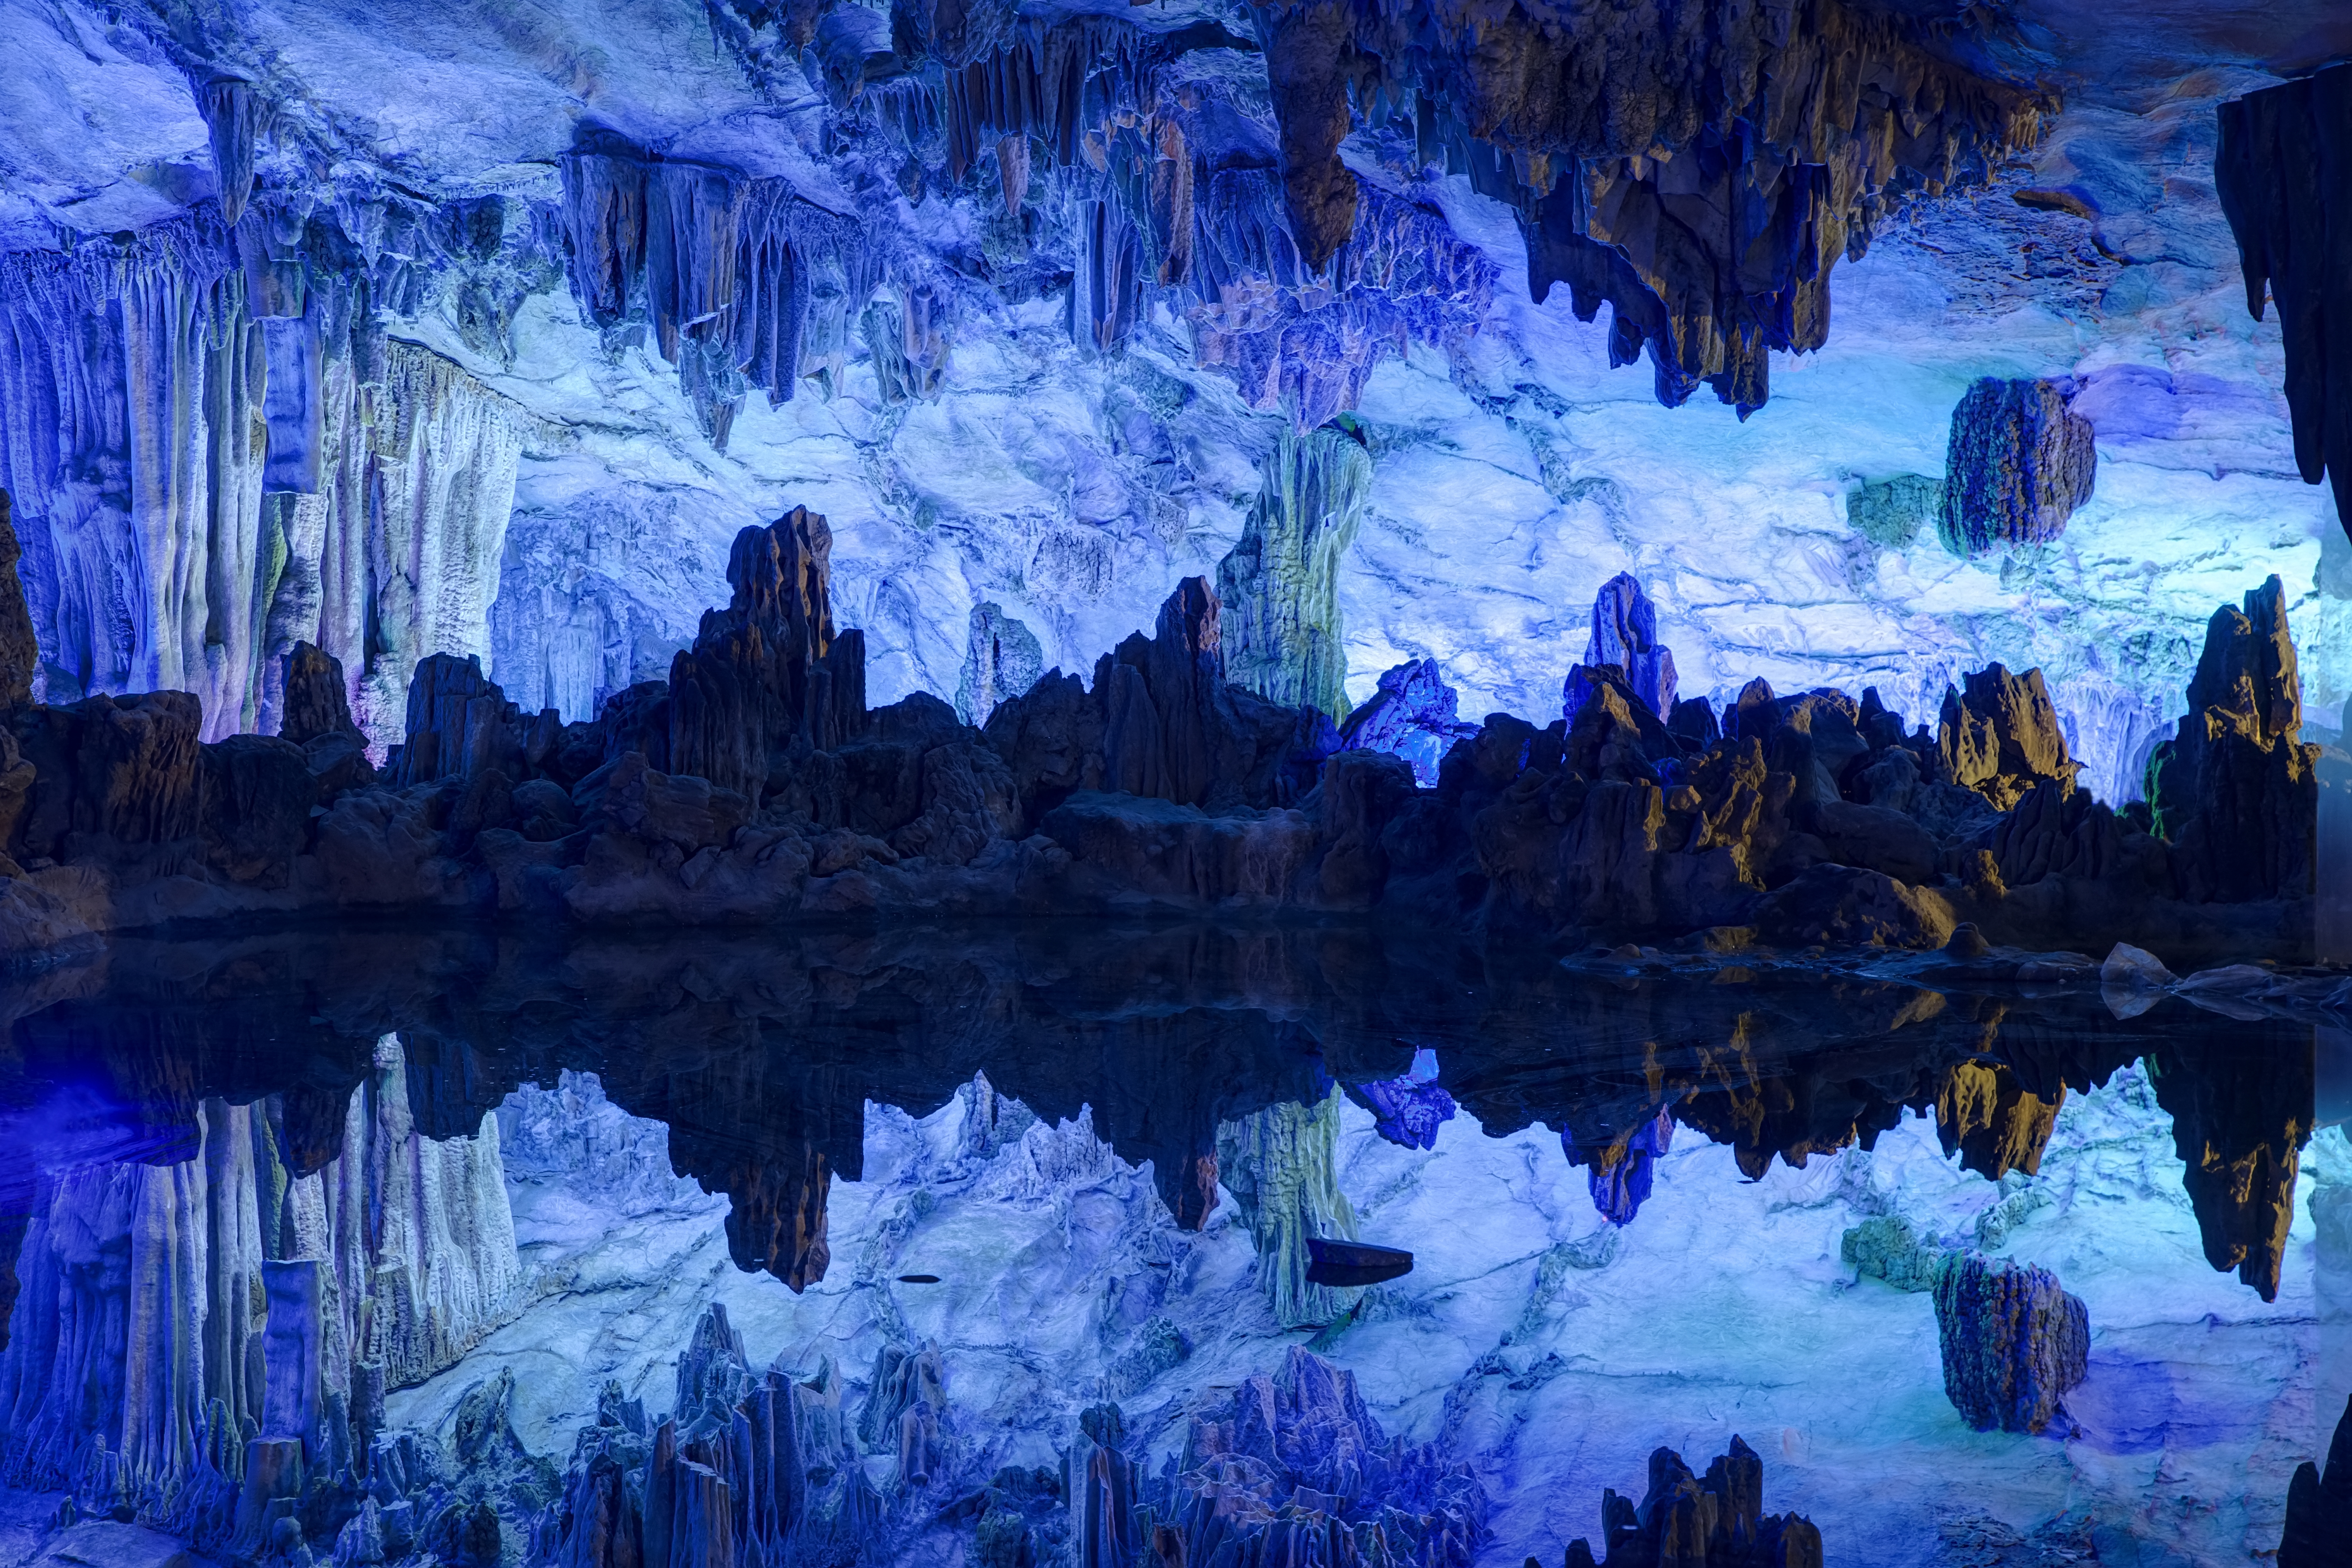 Reed Flute Cave China Guanxi Zhuang 5471x3647